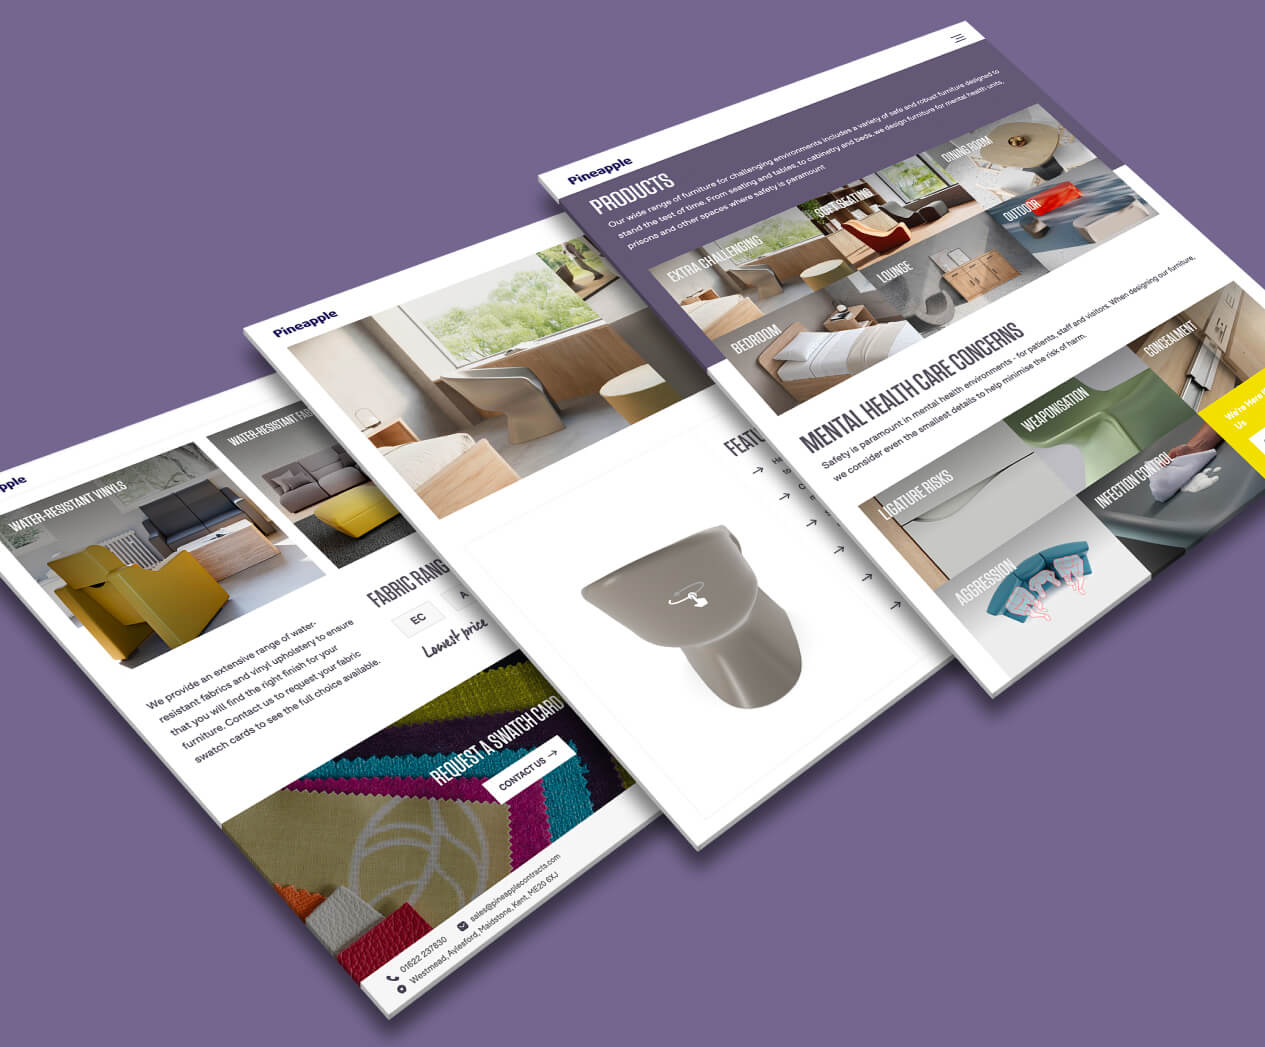 pages from the Pineapple Furniture website shown on a purple background - square